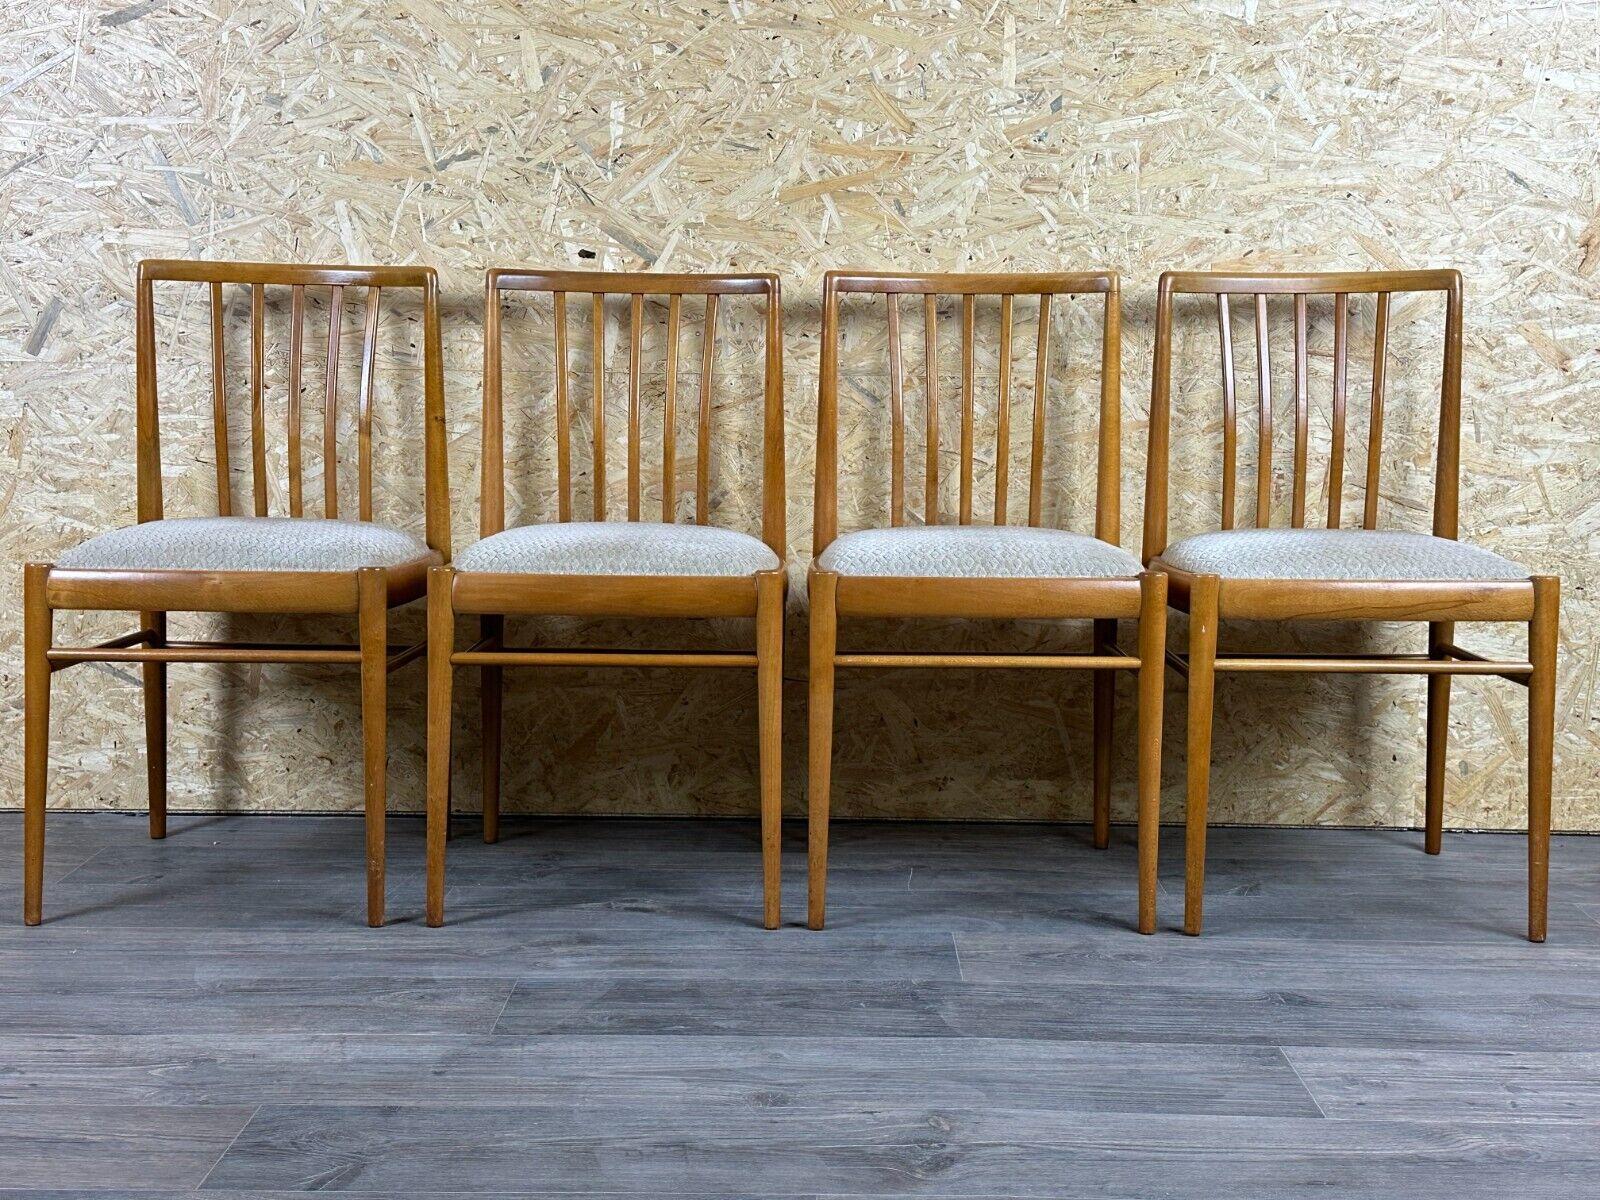 60s dining chairs